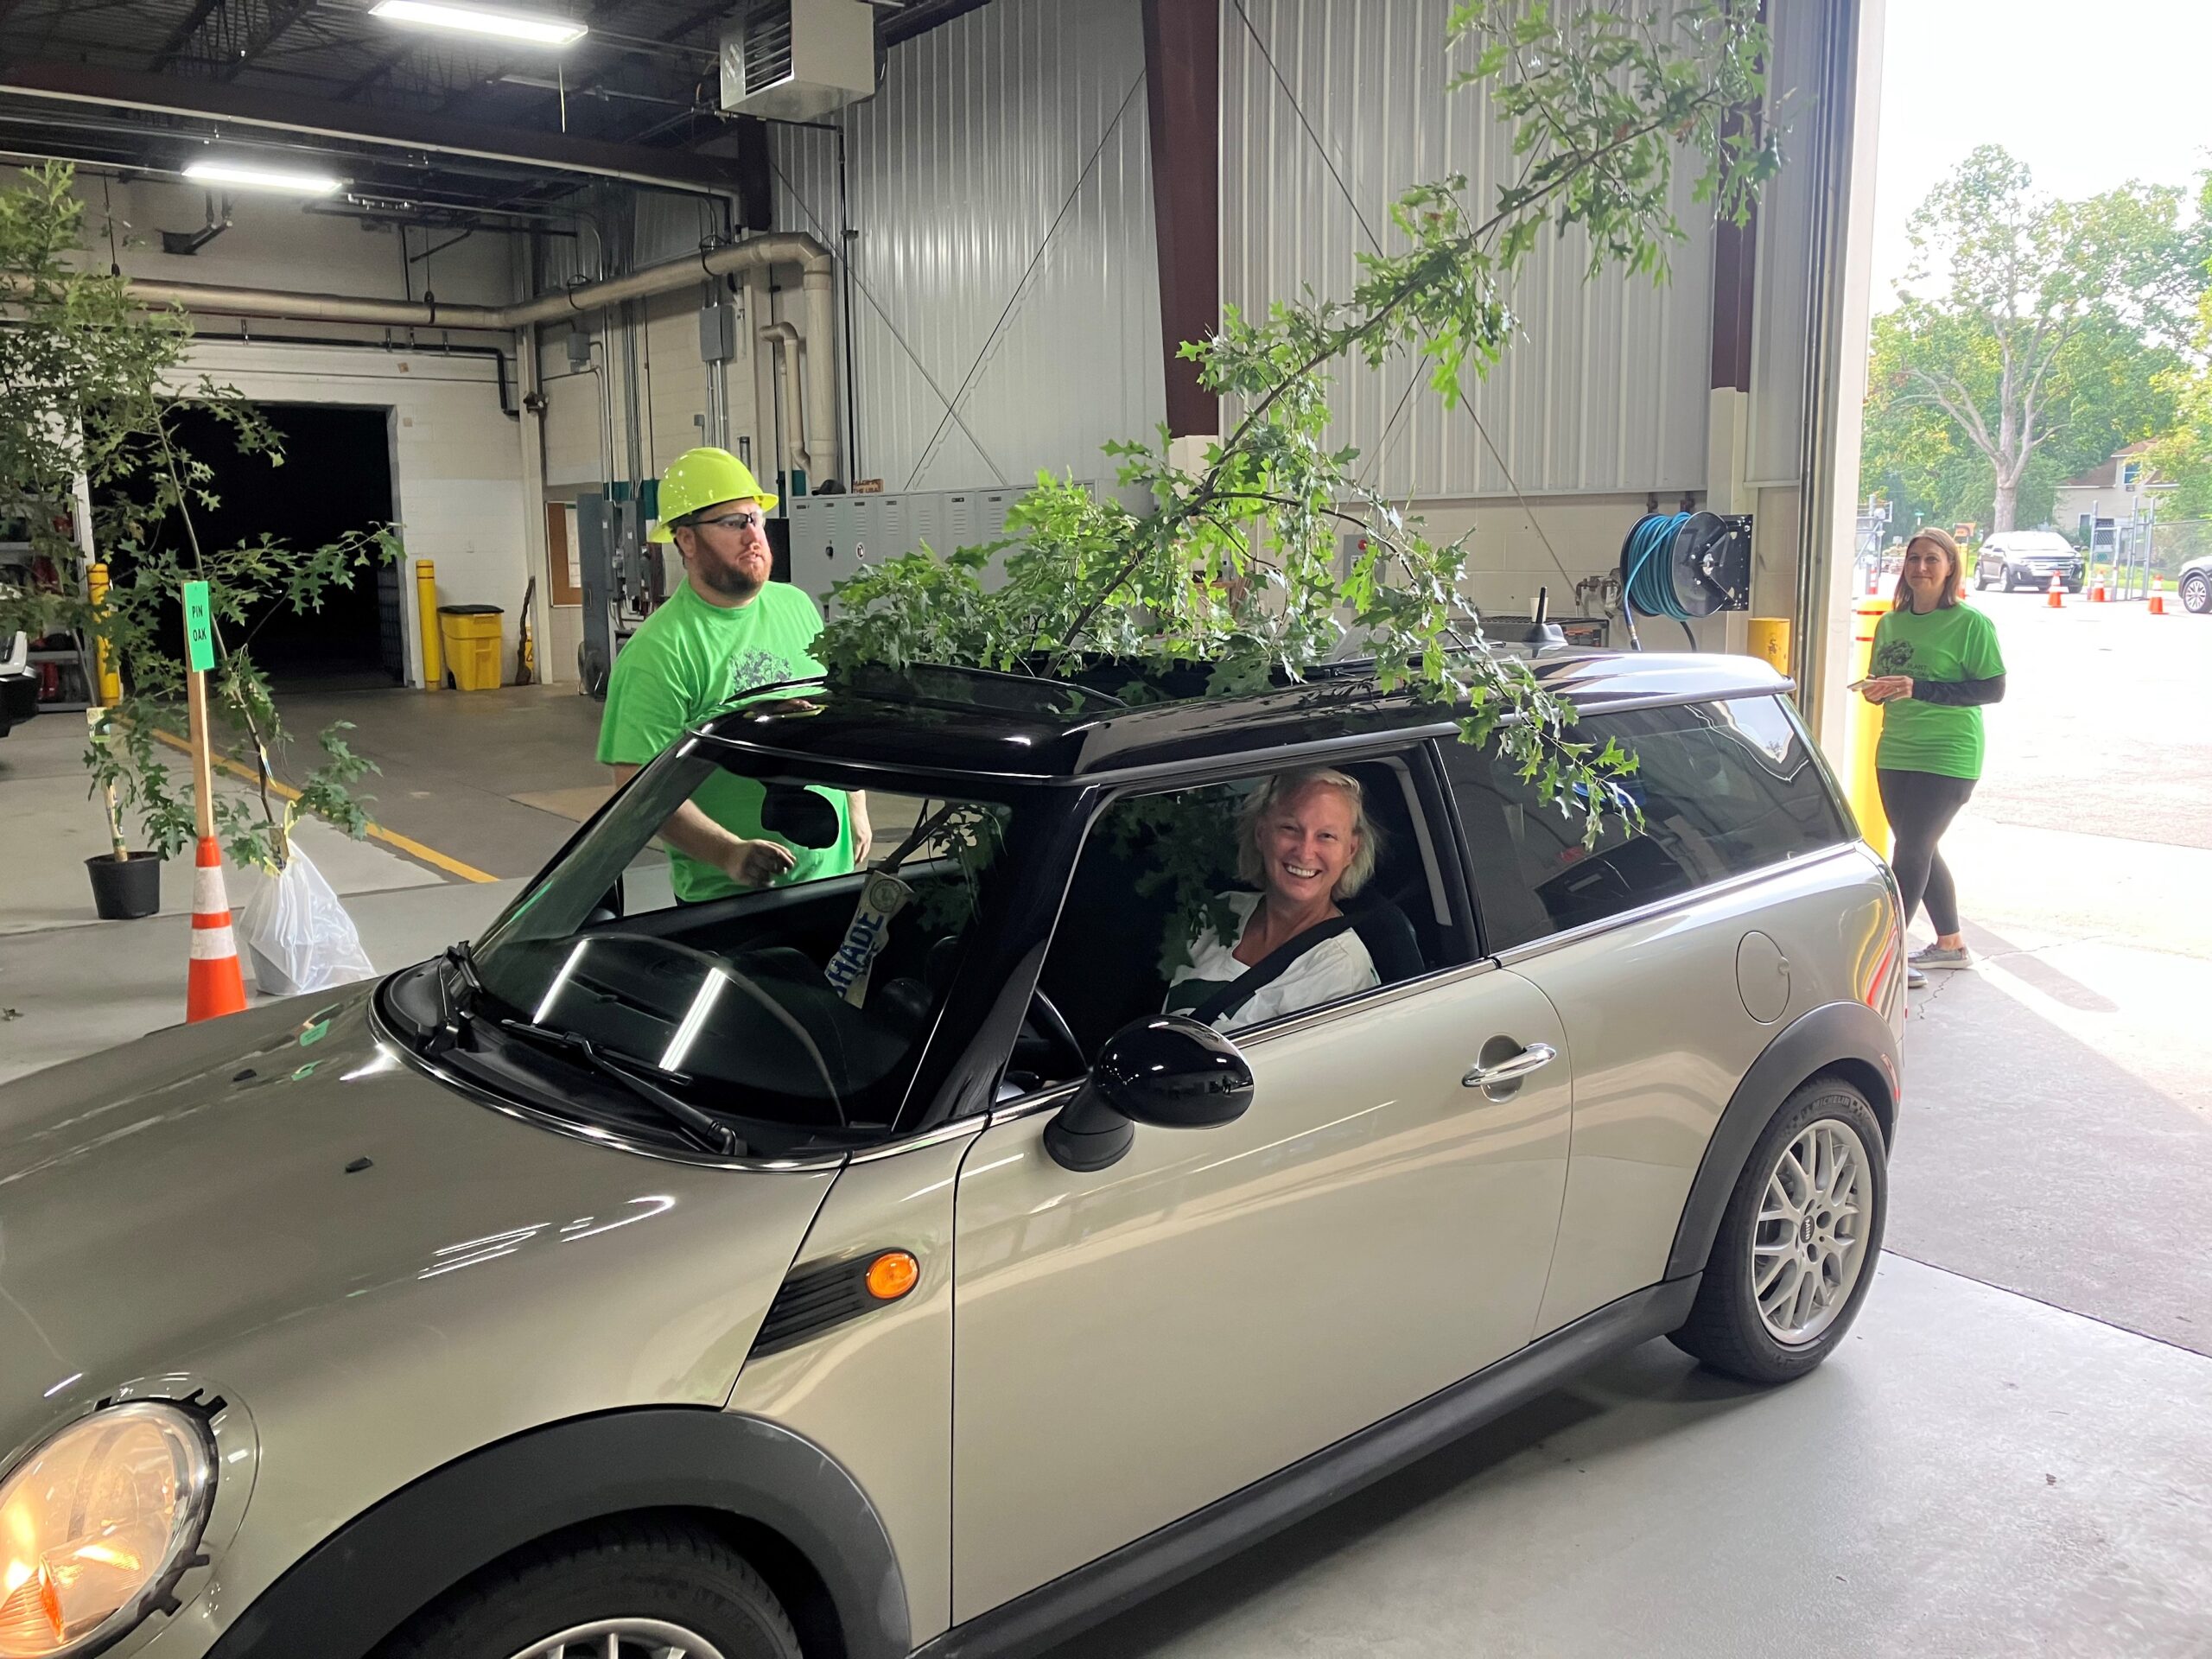 Energy Saving Trees - Kind customer smiles after we load the tree into her vehicle